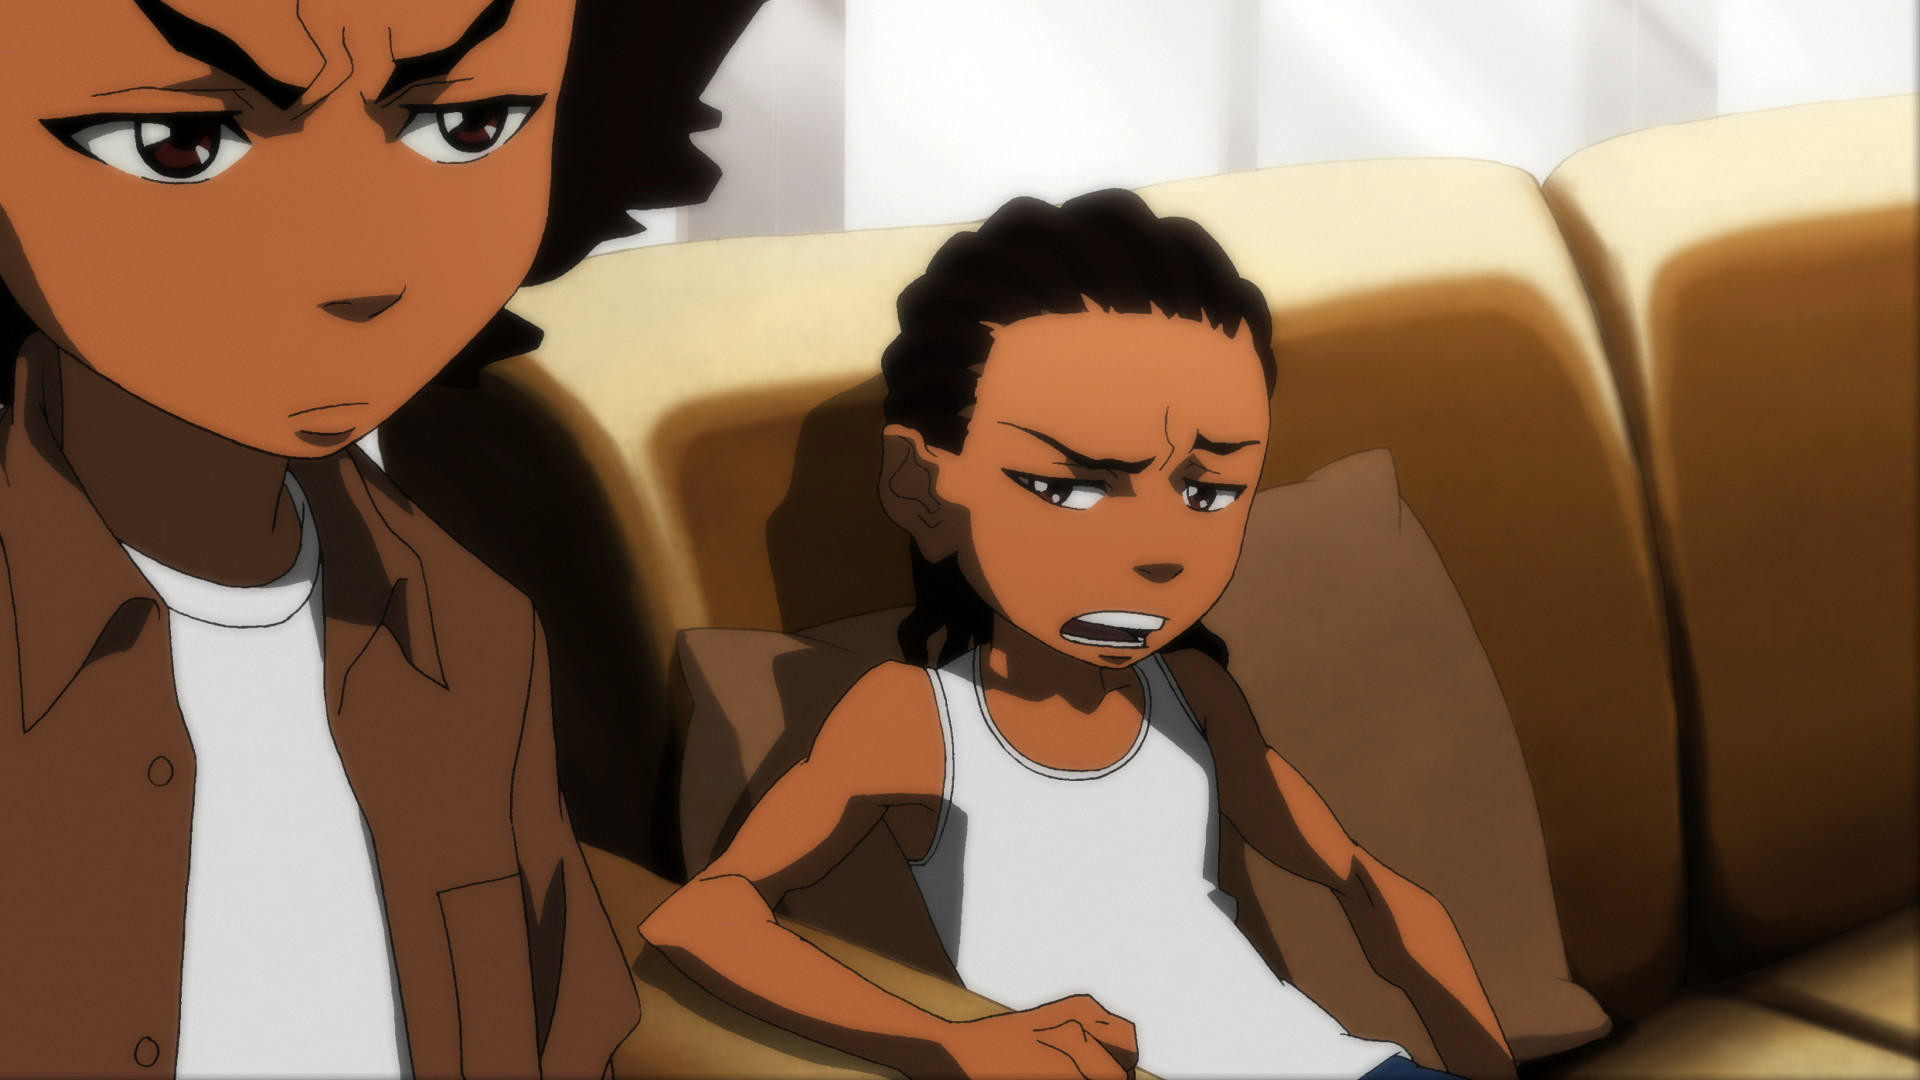 Huey Freeman, left, and brother Riley Freeman (both voiced by Regina King)